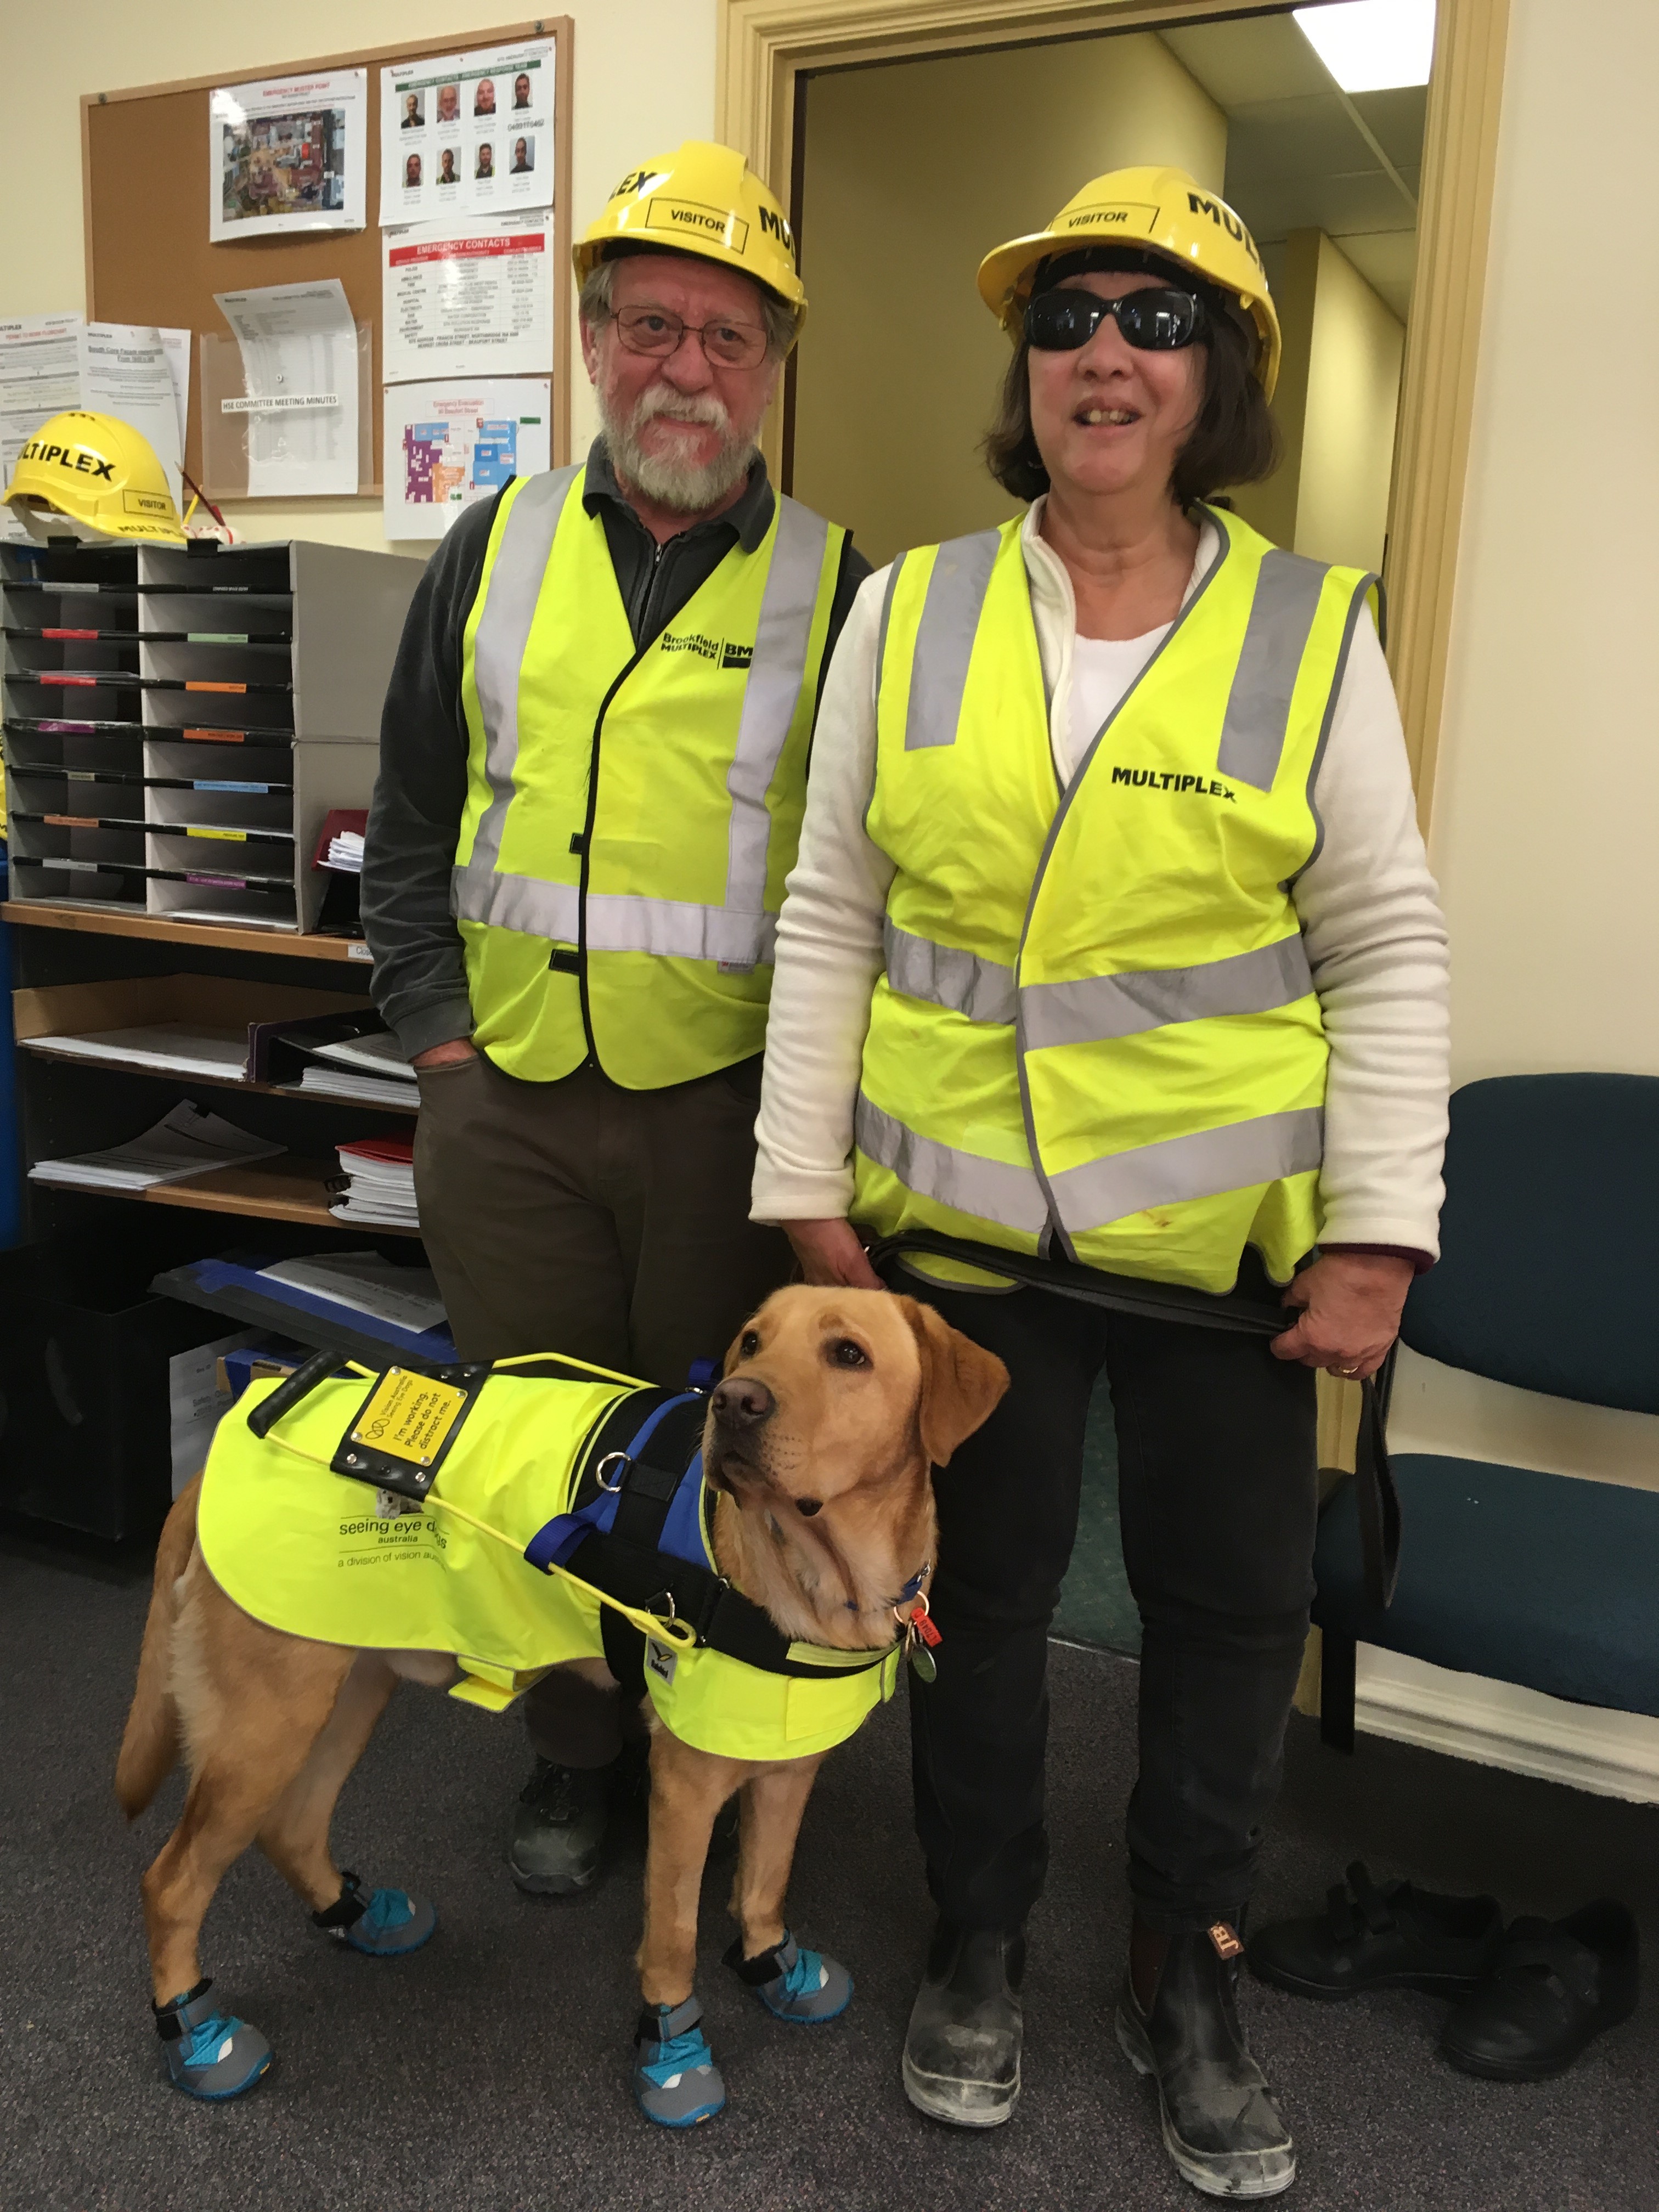 Pamela and her husband stand in high-visibility vests behind Pamela's Seeing Eye Dog Jock, who is also wearing a custom high-visibility vest and protective booties